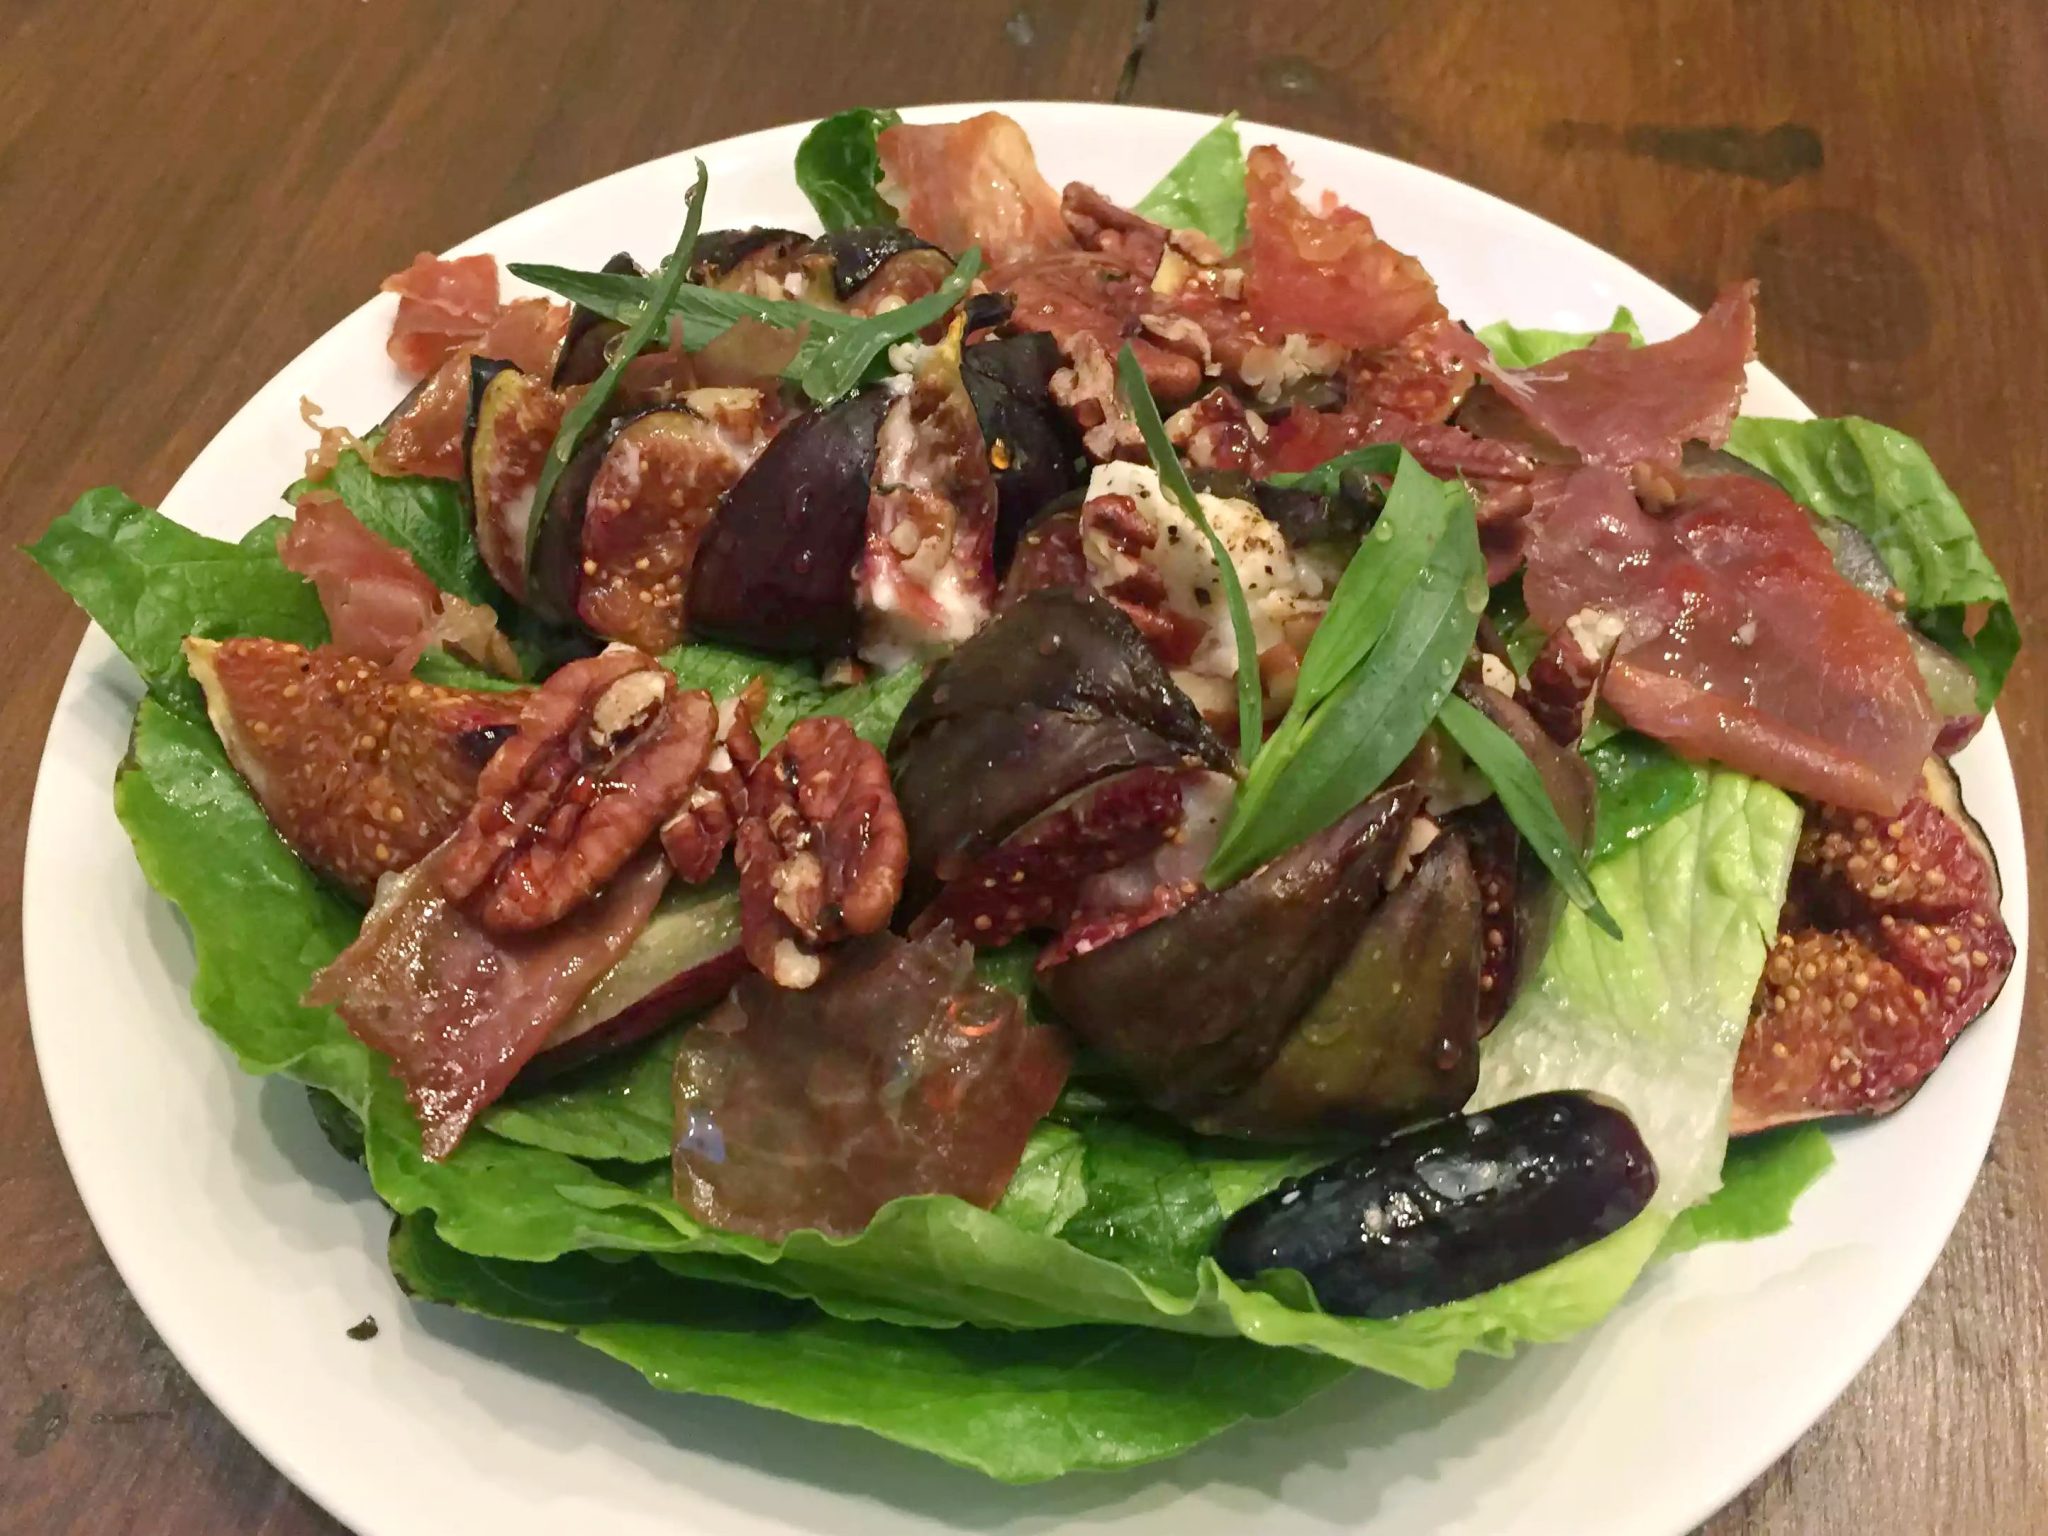 Roasted Fig, Brie & Crispy Prosciutto Salad with Grapes, Pecans, Tarragon & Honey from Emma Eats & Explores - SCD, Paleo, Gluten-Free, Grain-Free, Refined Sugar-Free, Clean Eating